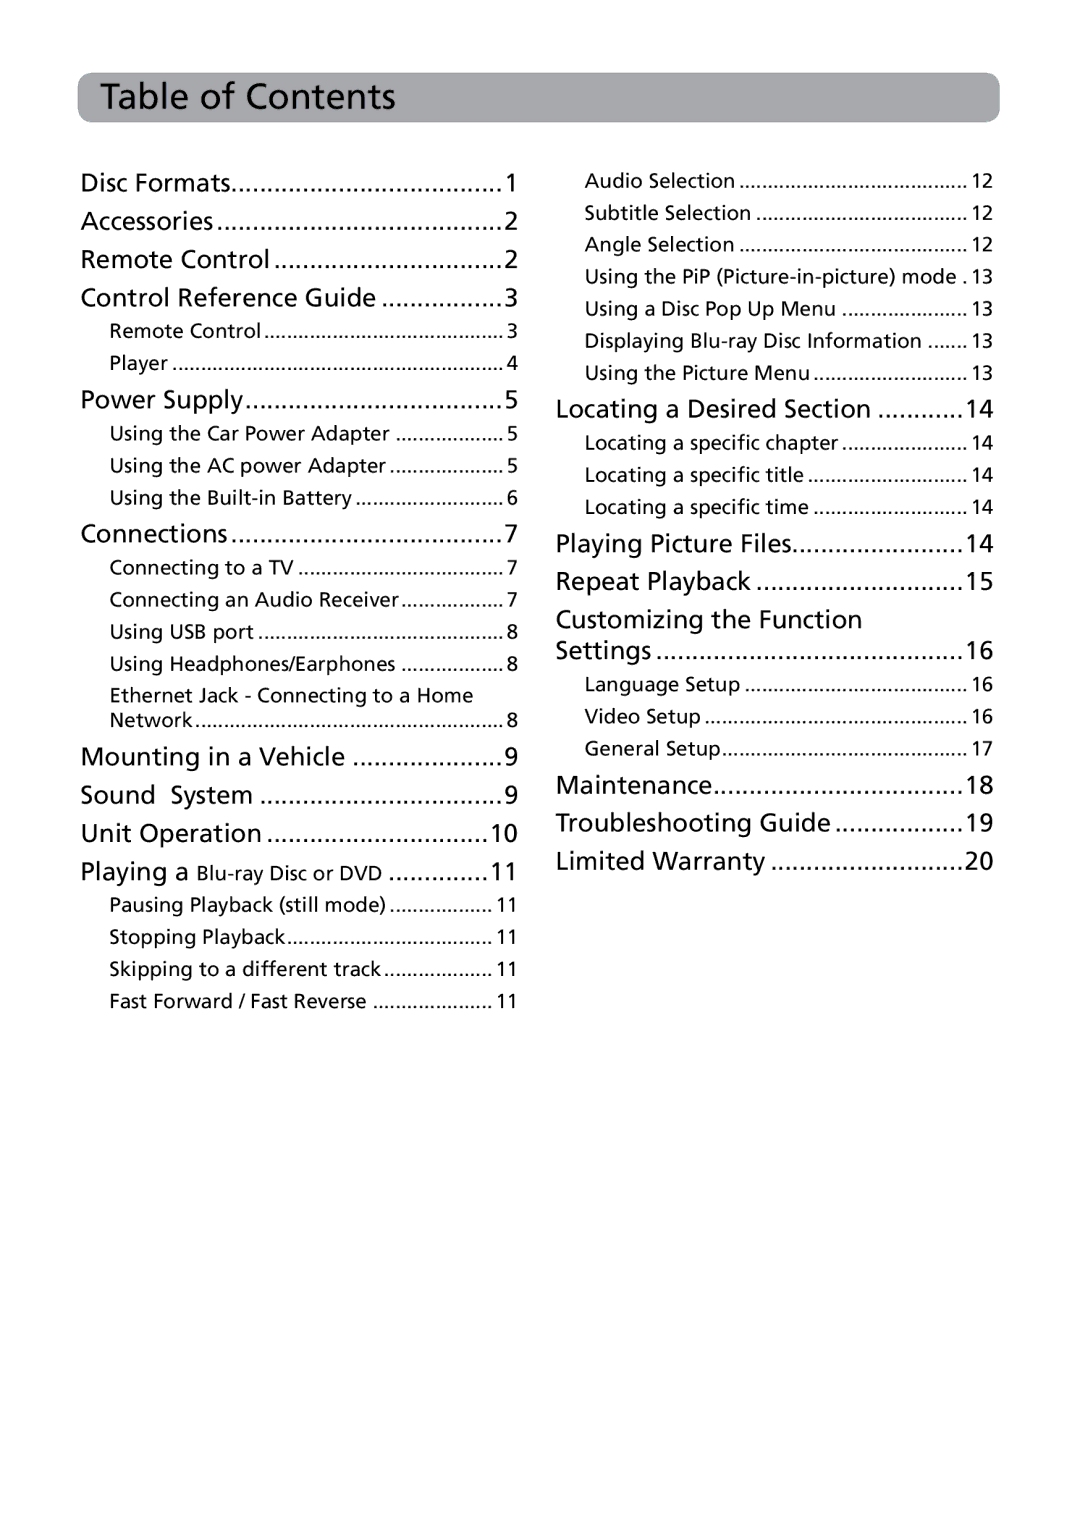 RCA BRC3108 user manual Table of Contents 